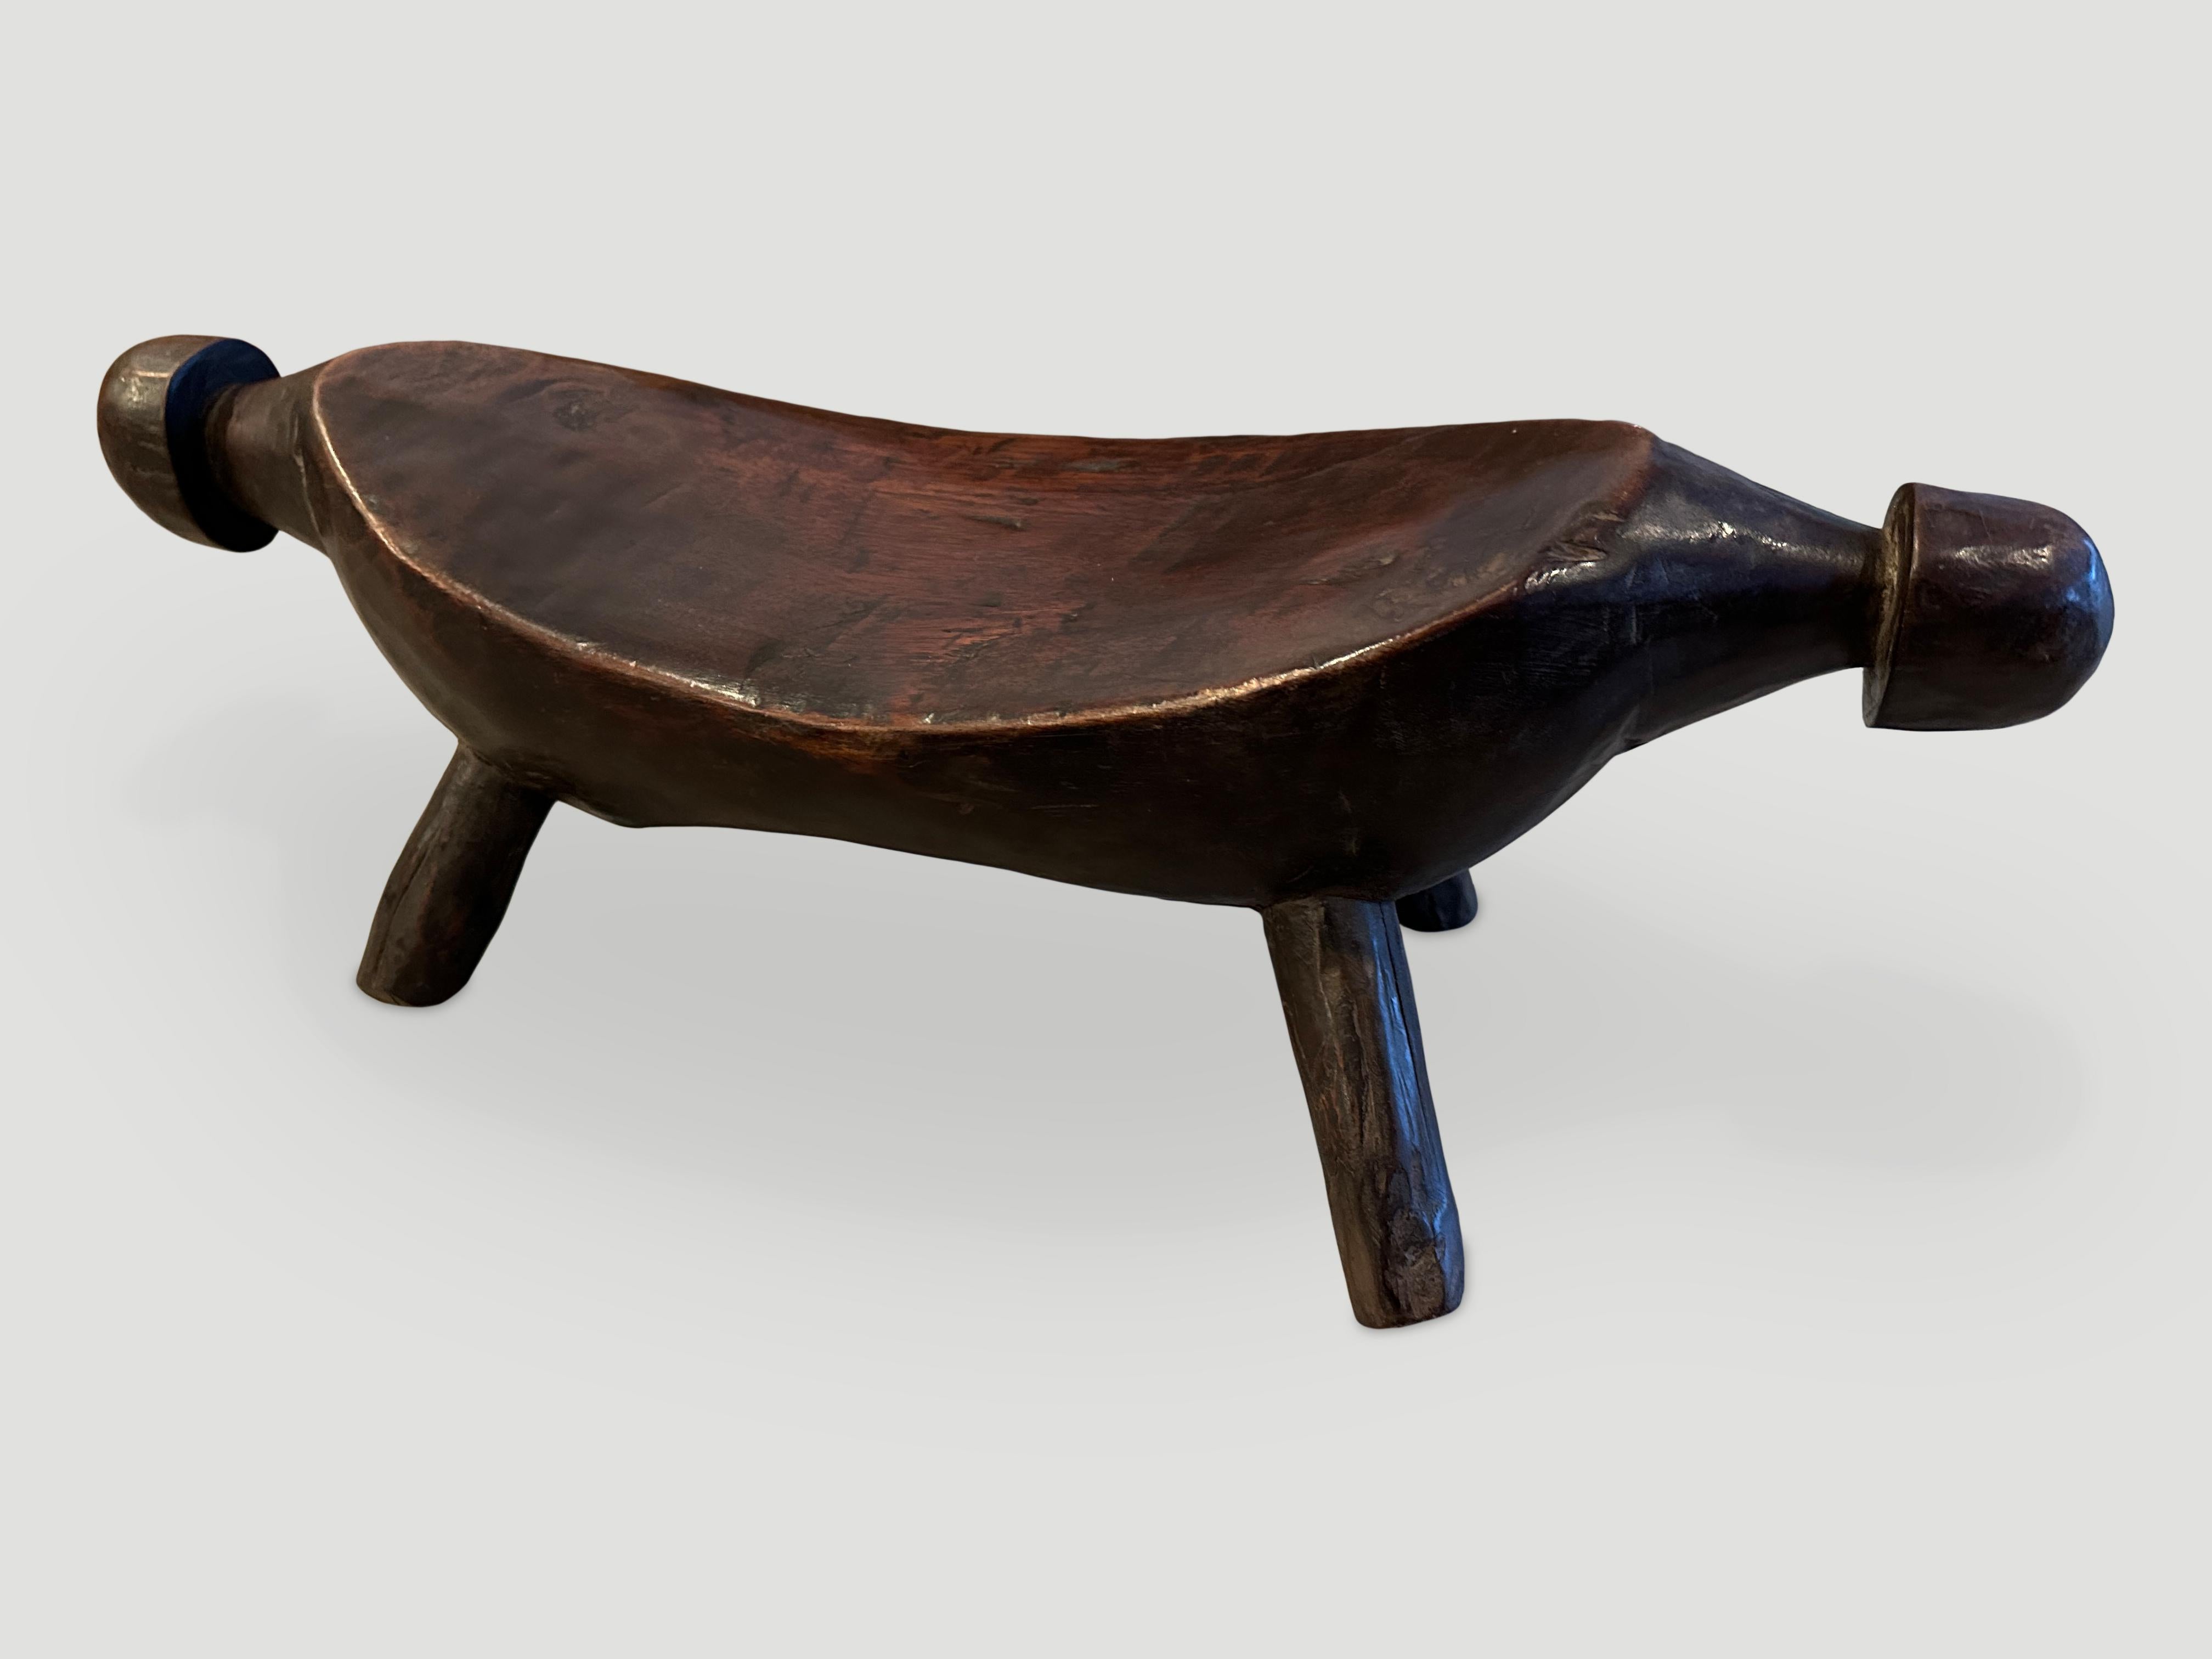 Beautiful museum quality, wooden head rest. Stunning patina on this rare piece of art from Sudan. Hand carved from a single block of wood by the Dinka tribe, circa 1900

This head rest was sourced in the spirit of Wabi-Sabi, a Japanese philosophy